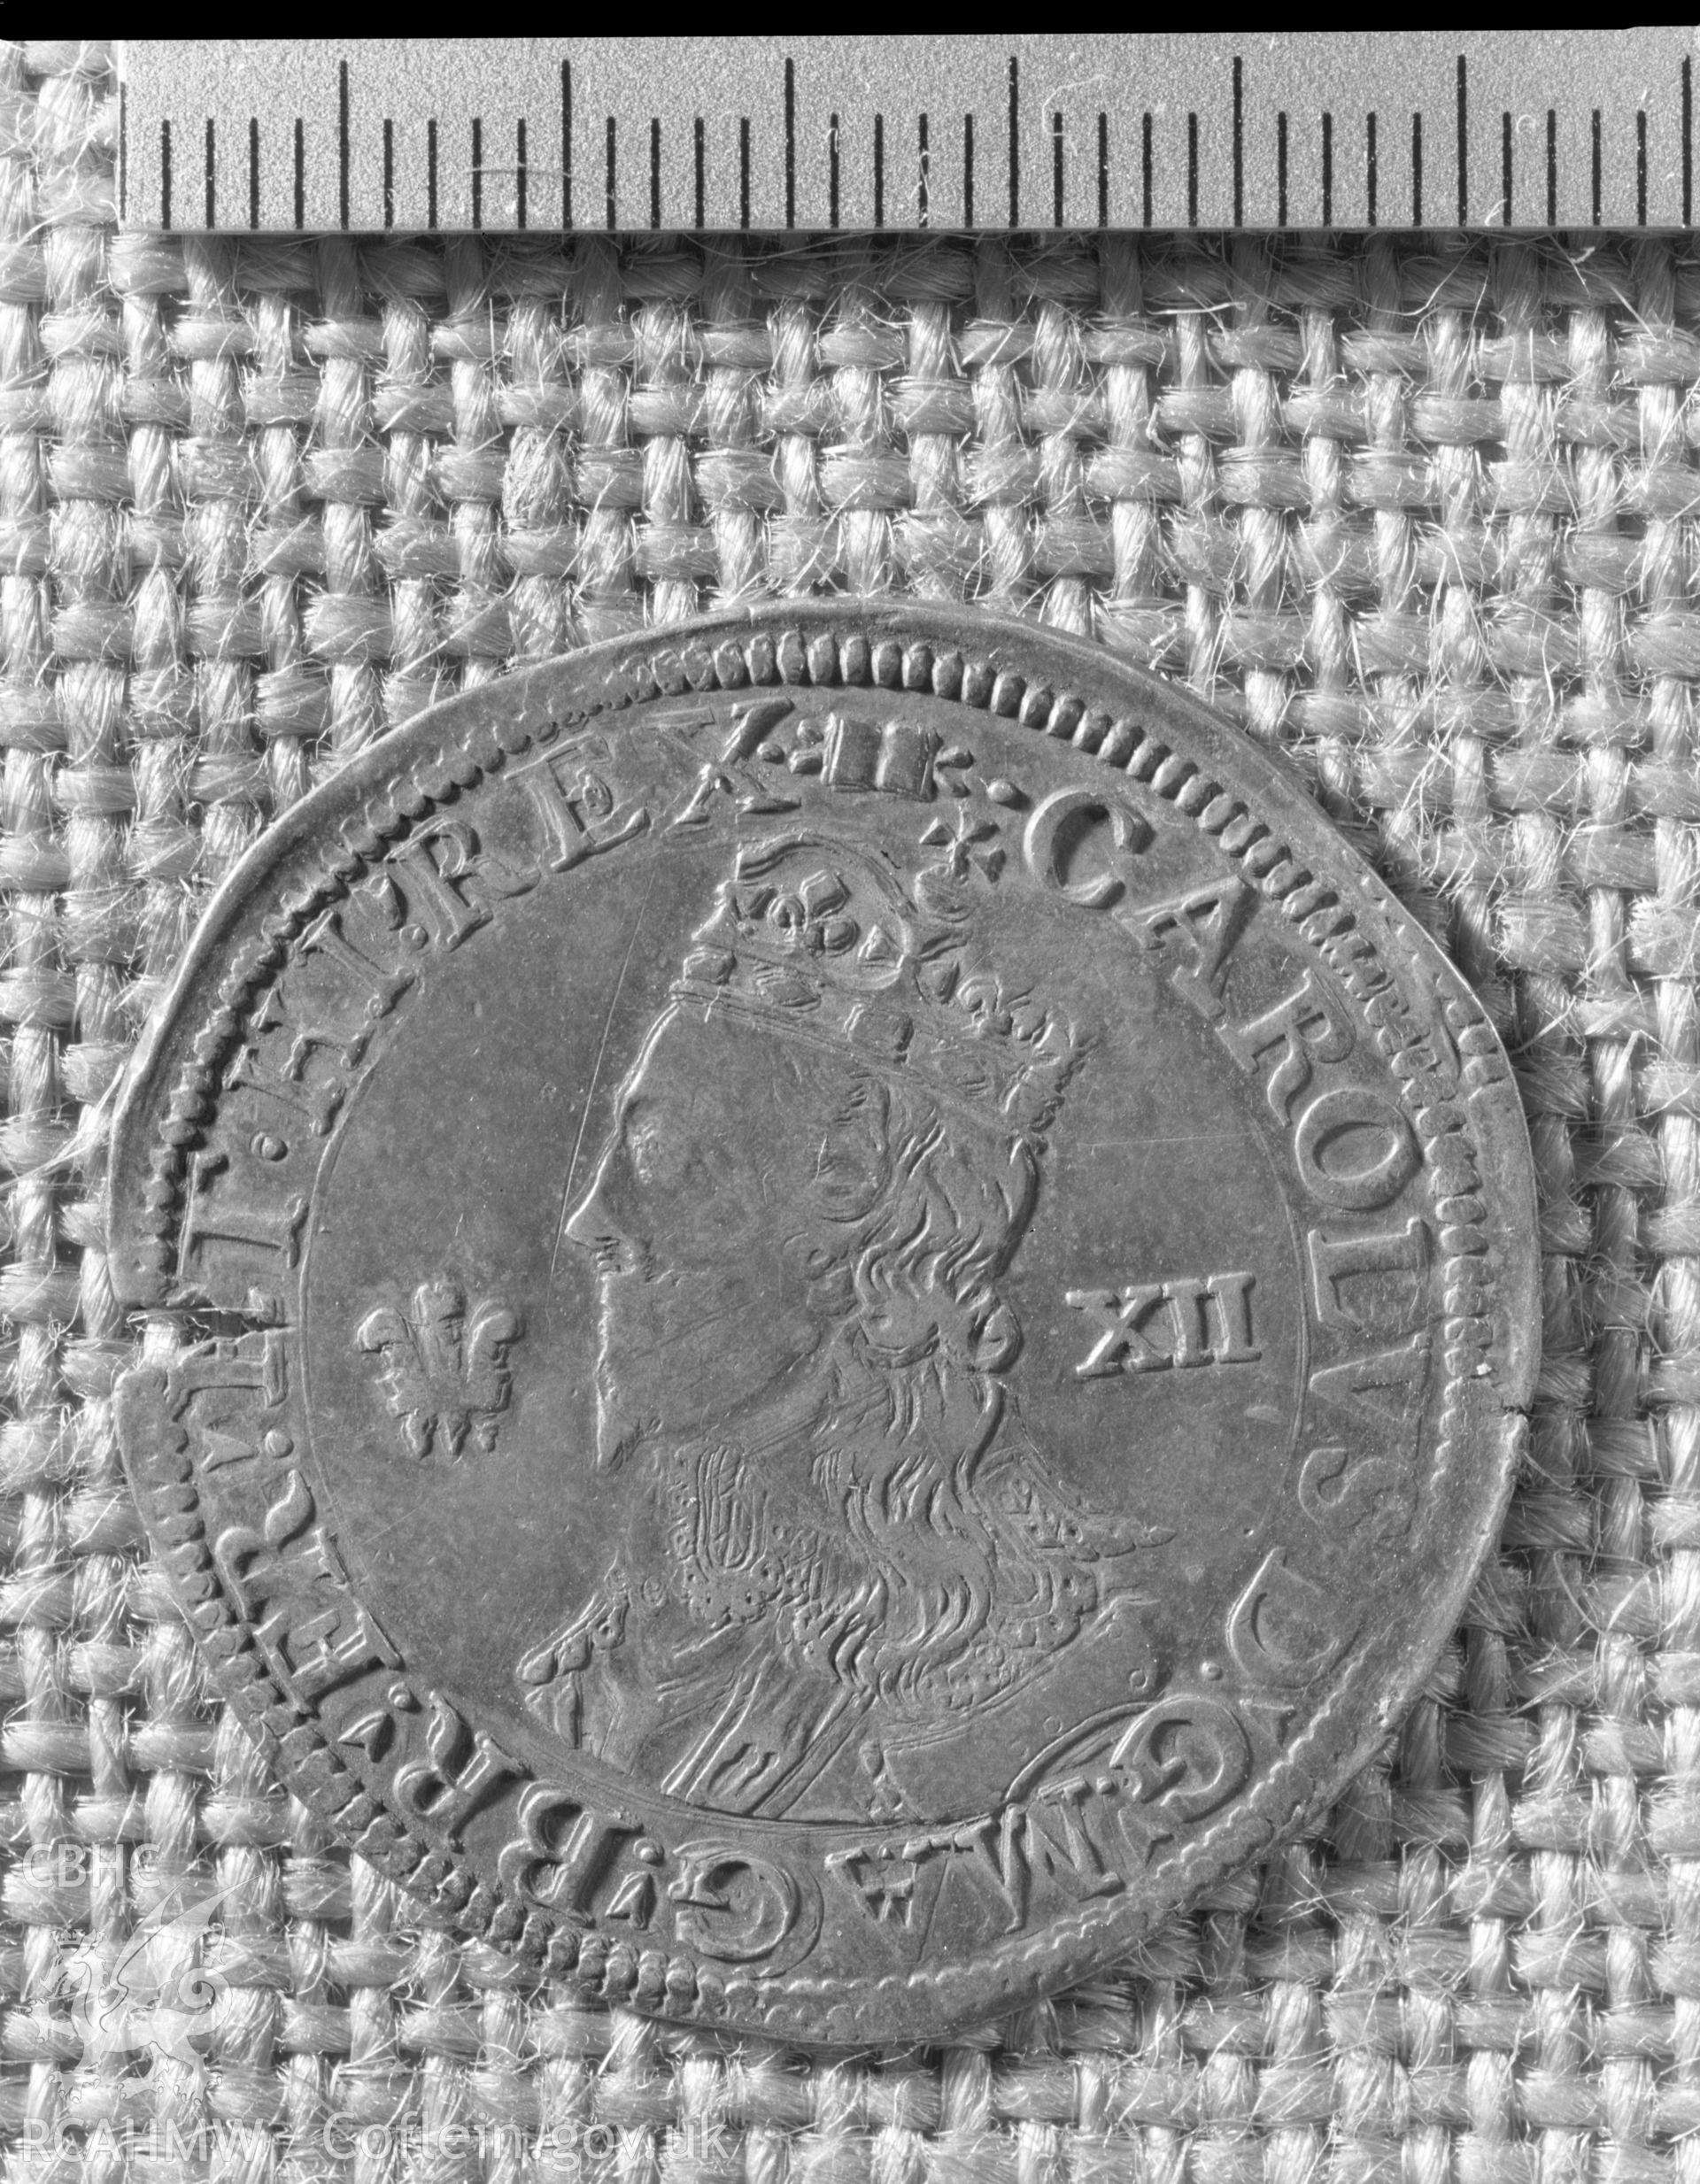 Black and white acetate negative showing coin from Aberystwyth Mint.